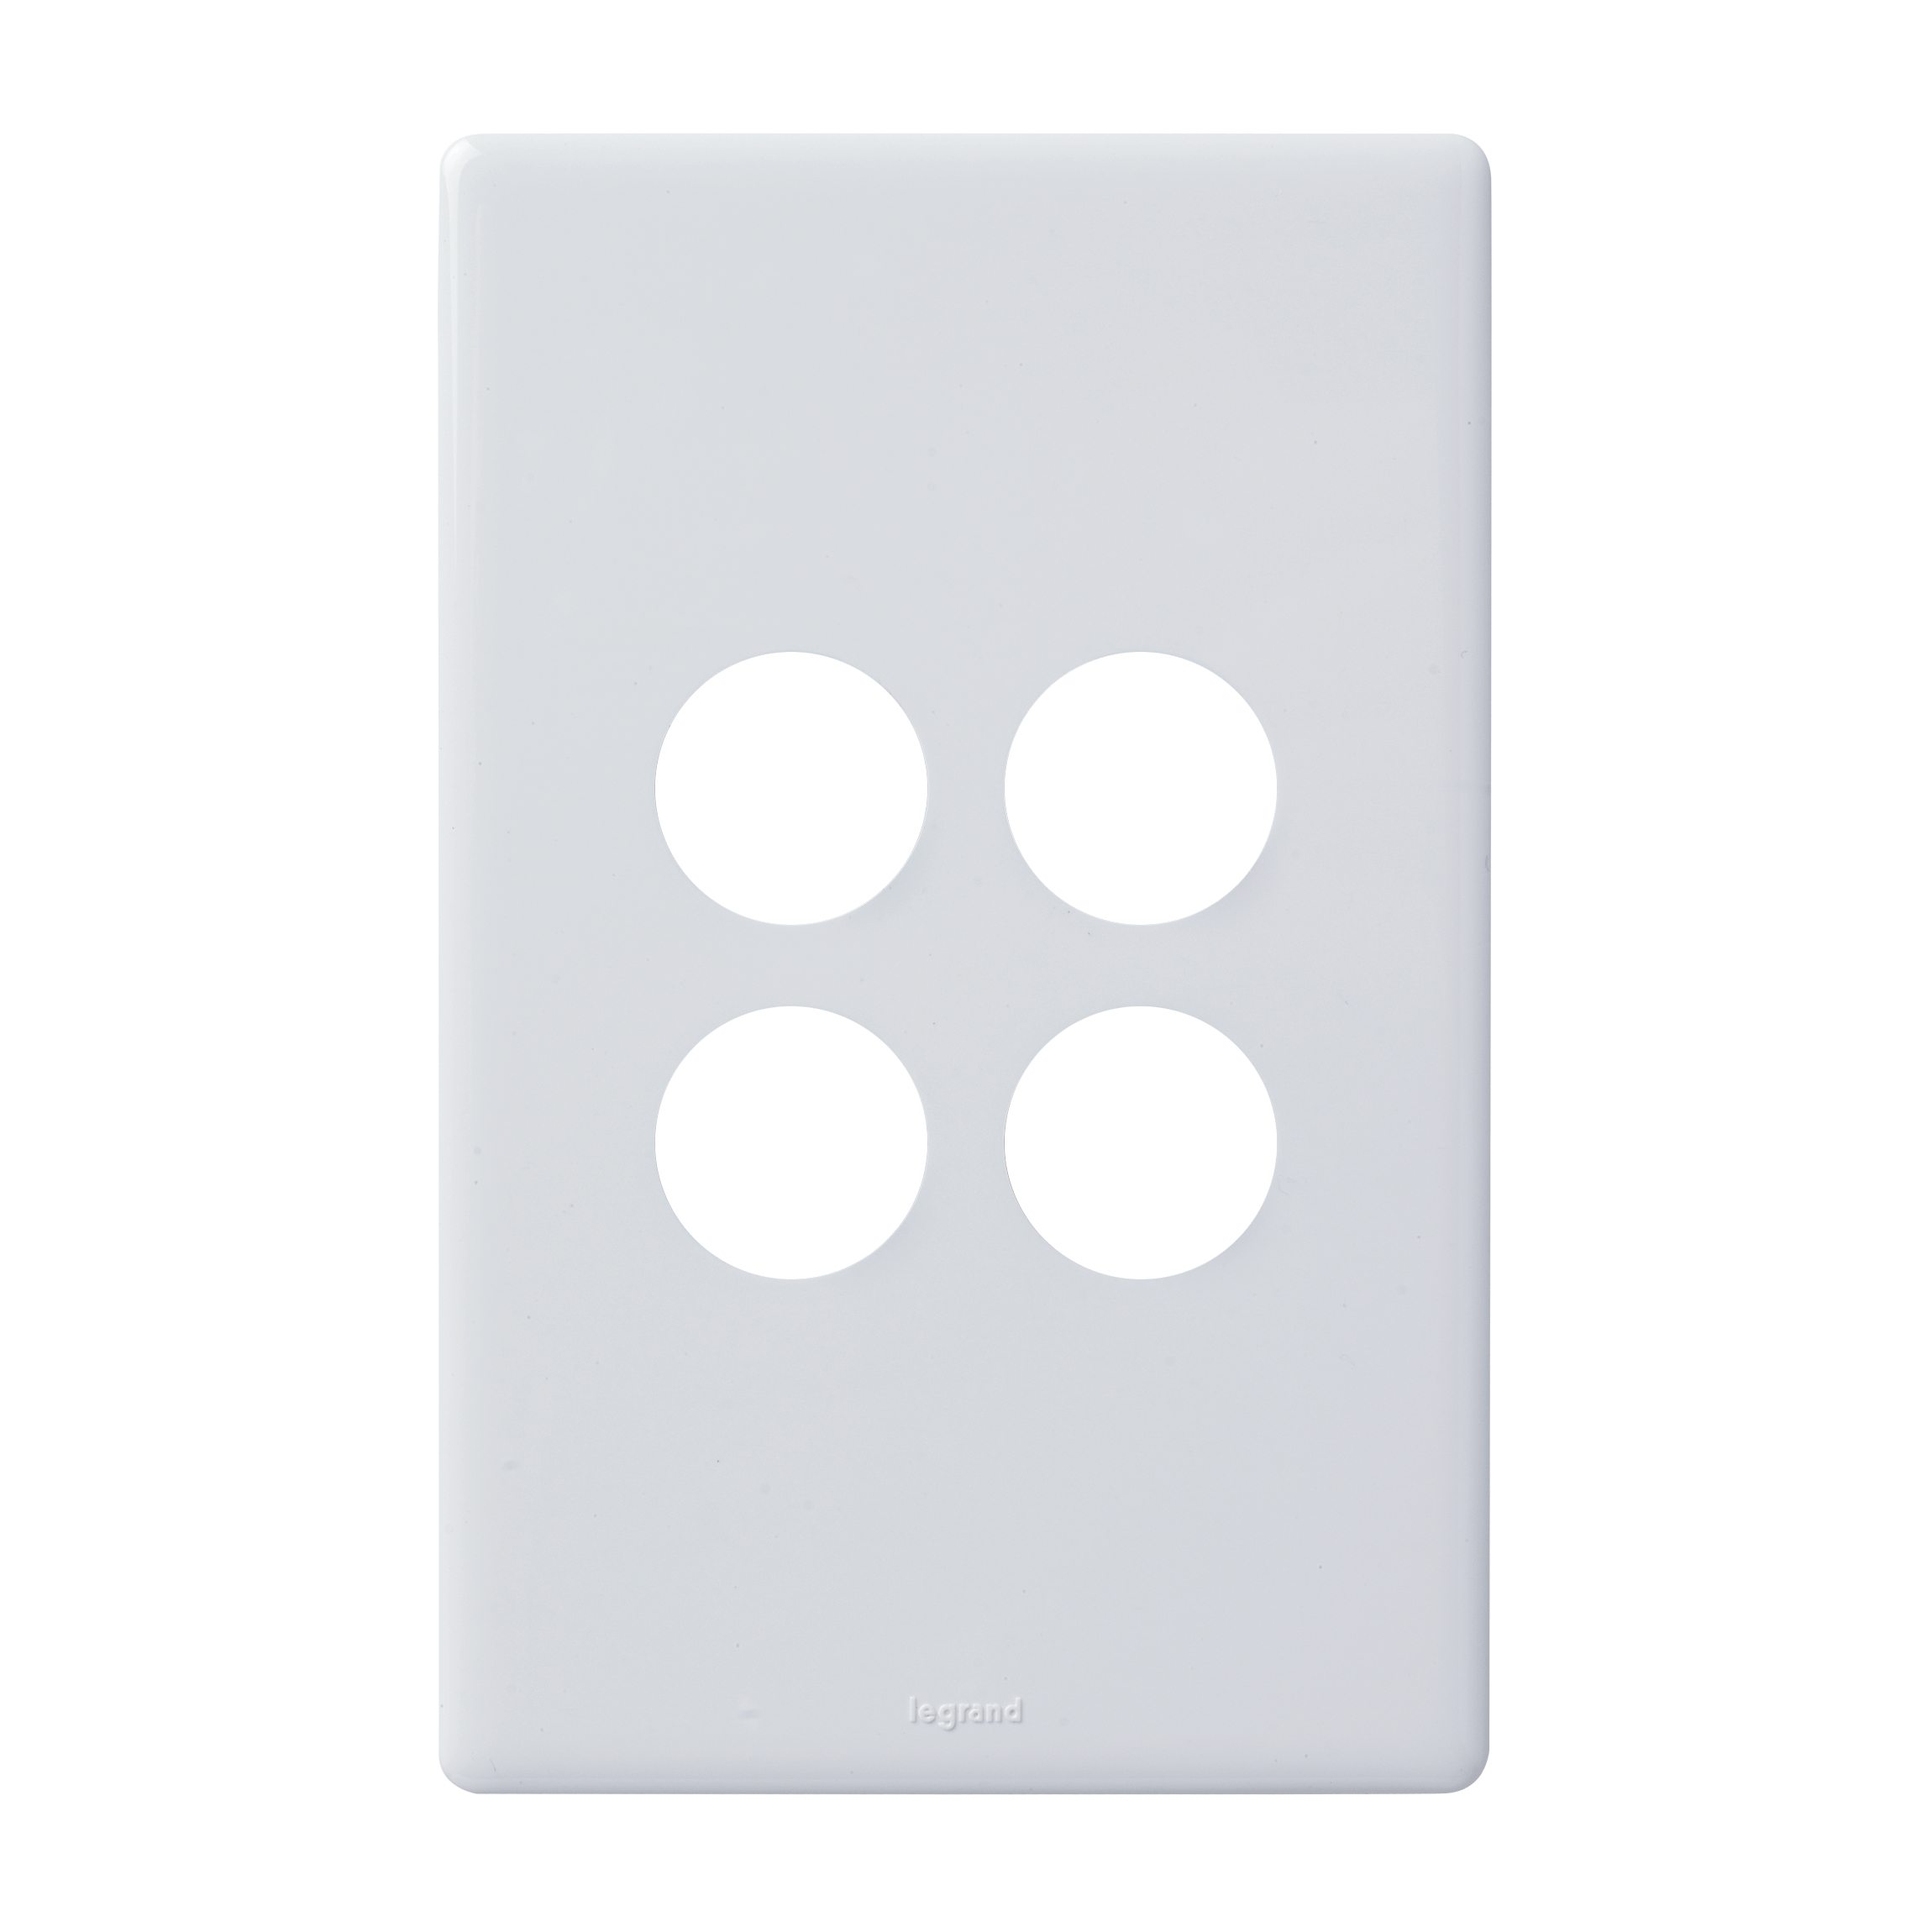 4-GANG GRID & COVERPLATE WHITE, EXCEL LIFE